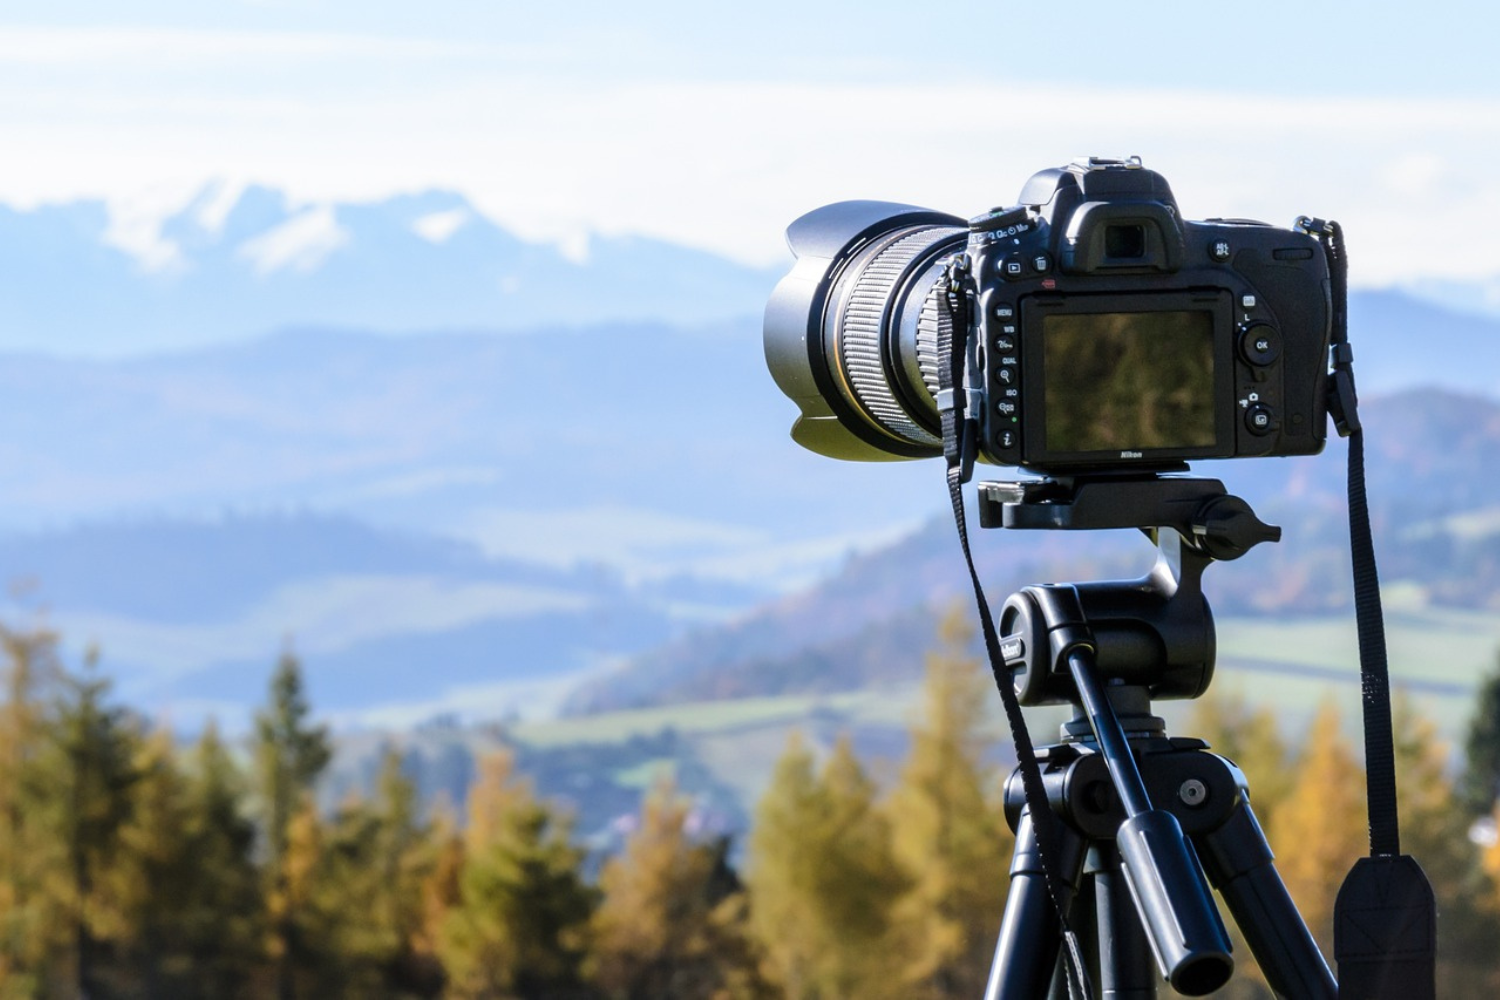 Image of camera on a tripod focussed on countryside